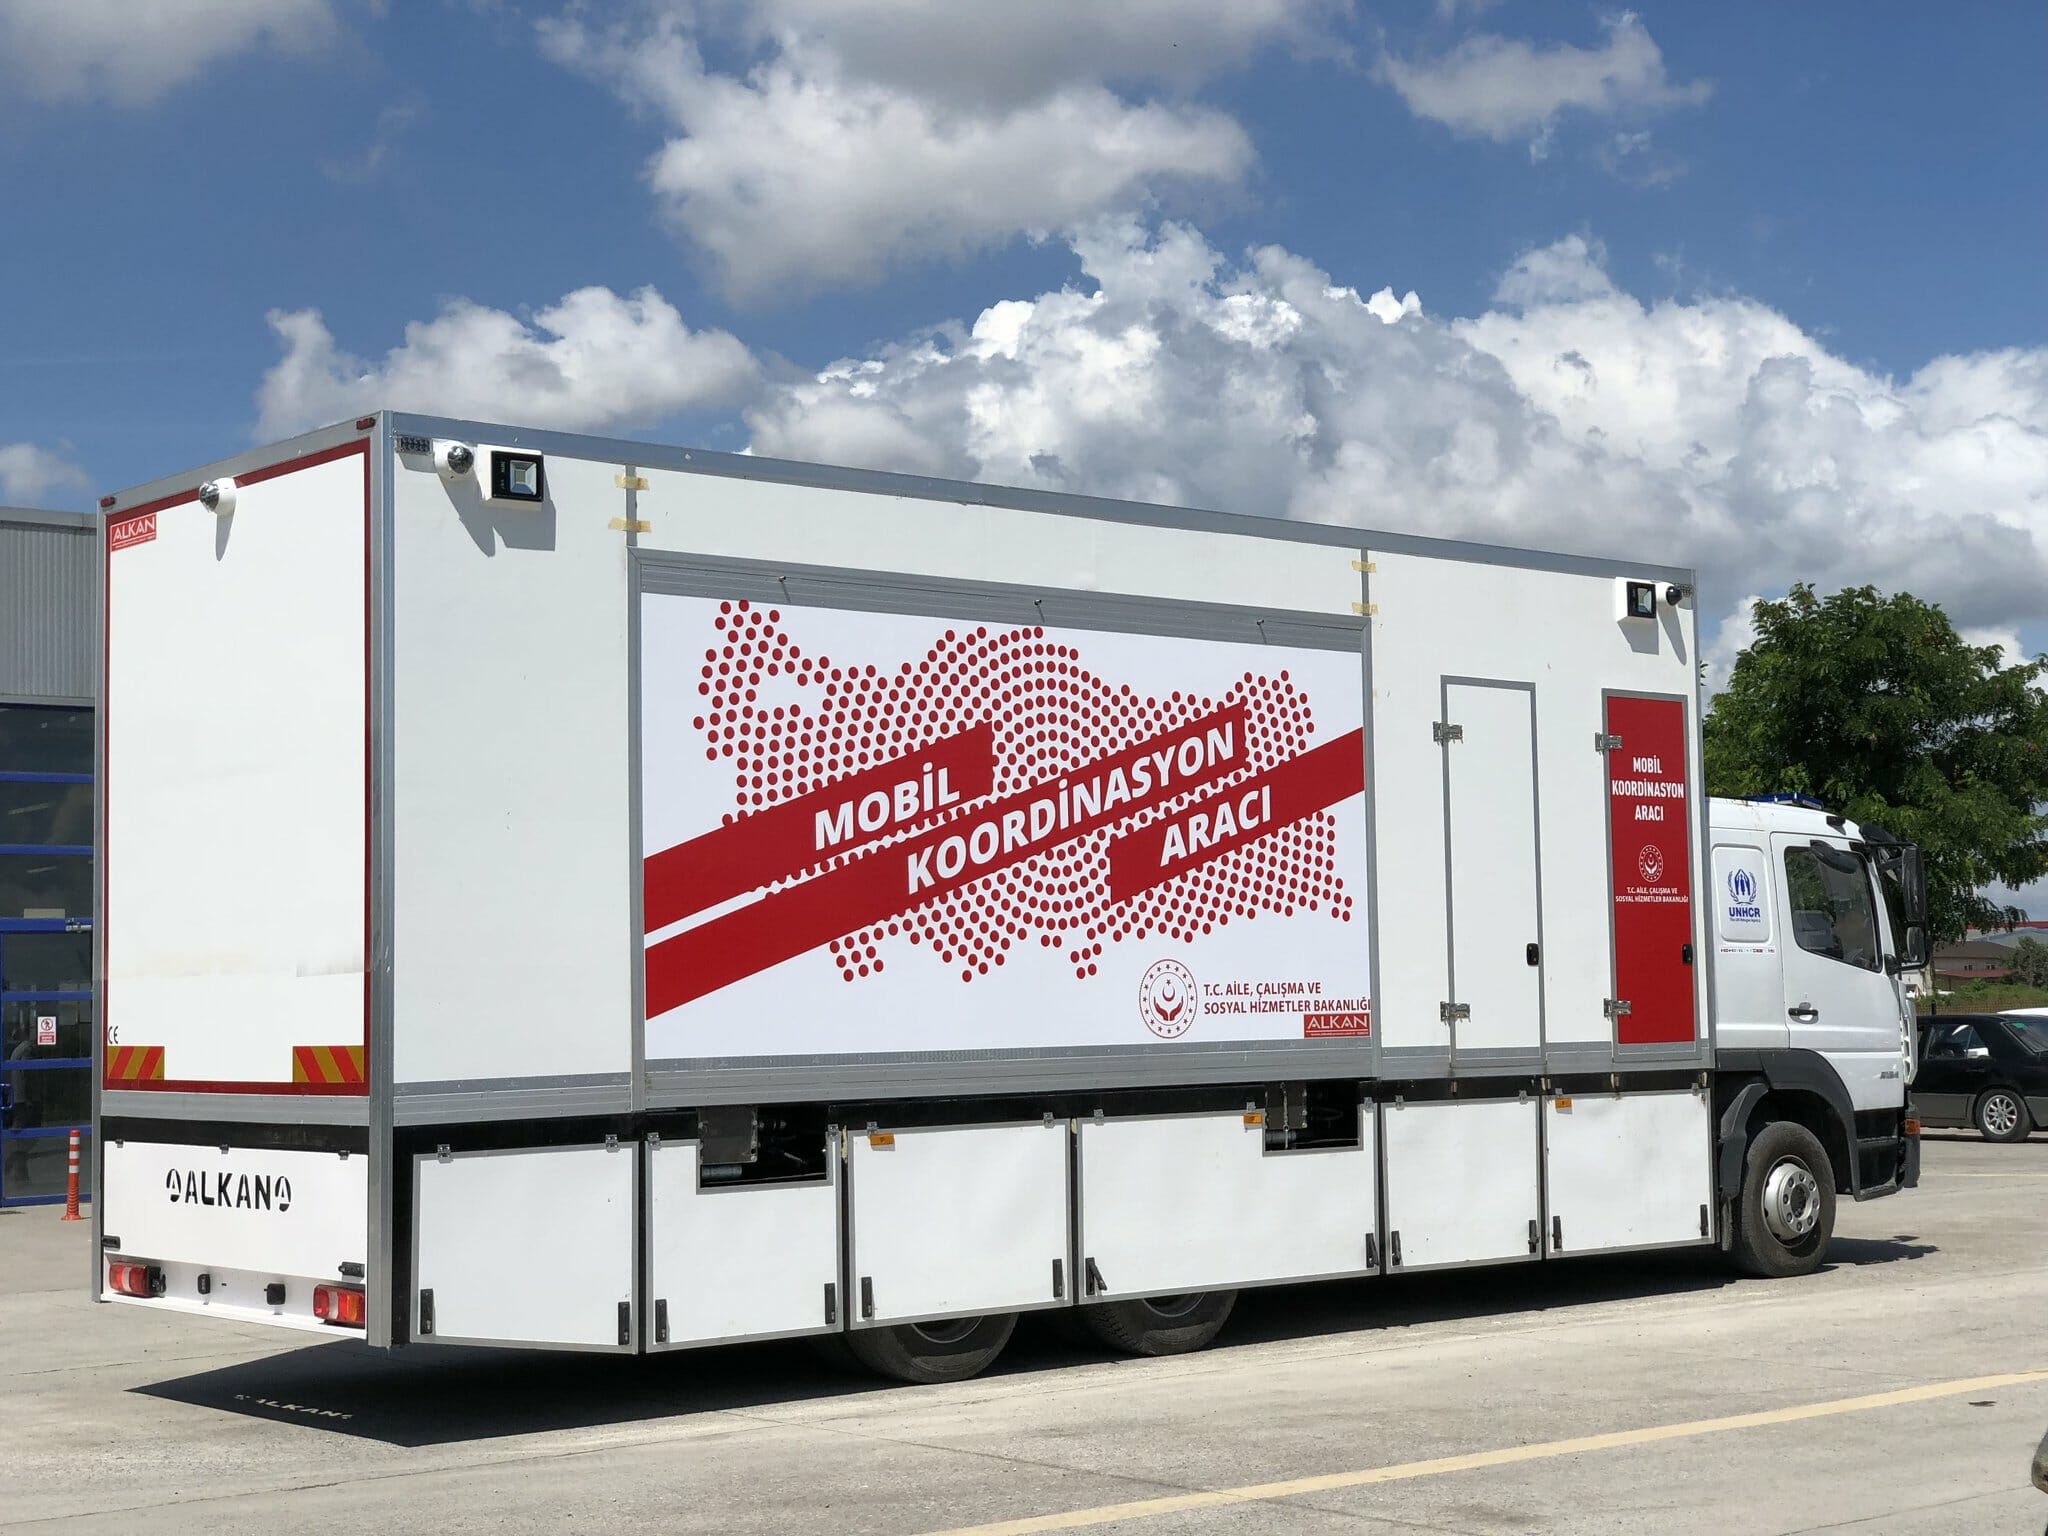 Mobile Coordination Vehicle Trailers of 2019 Delivered